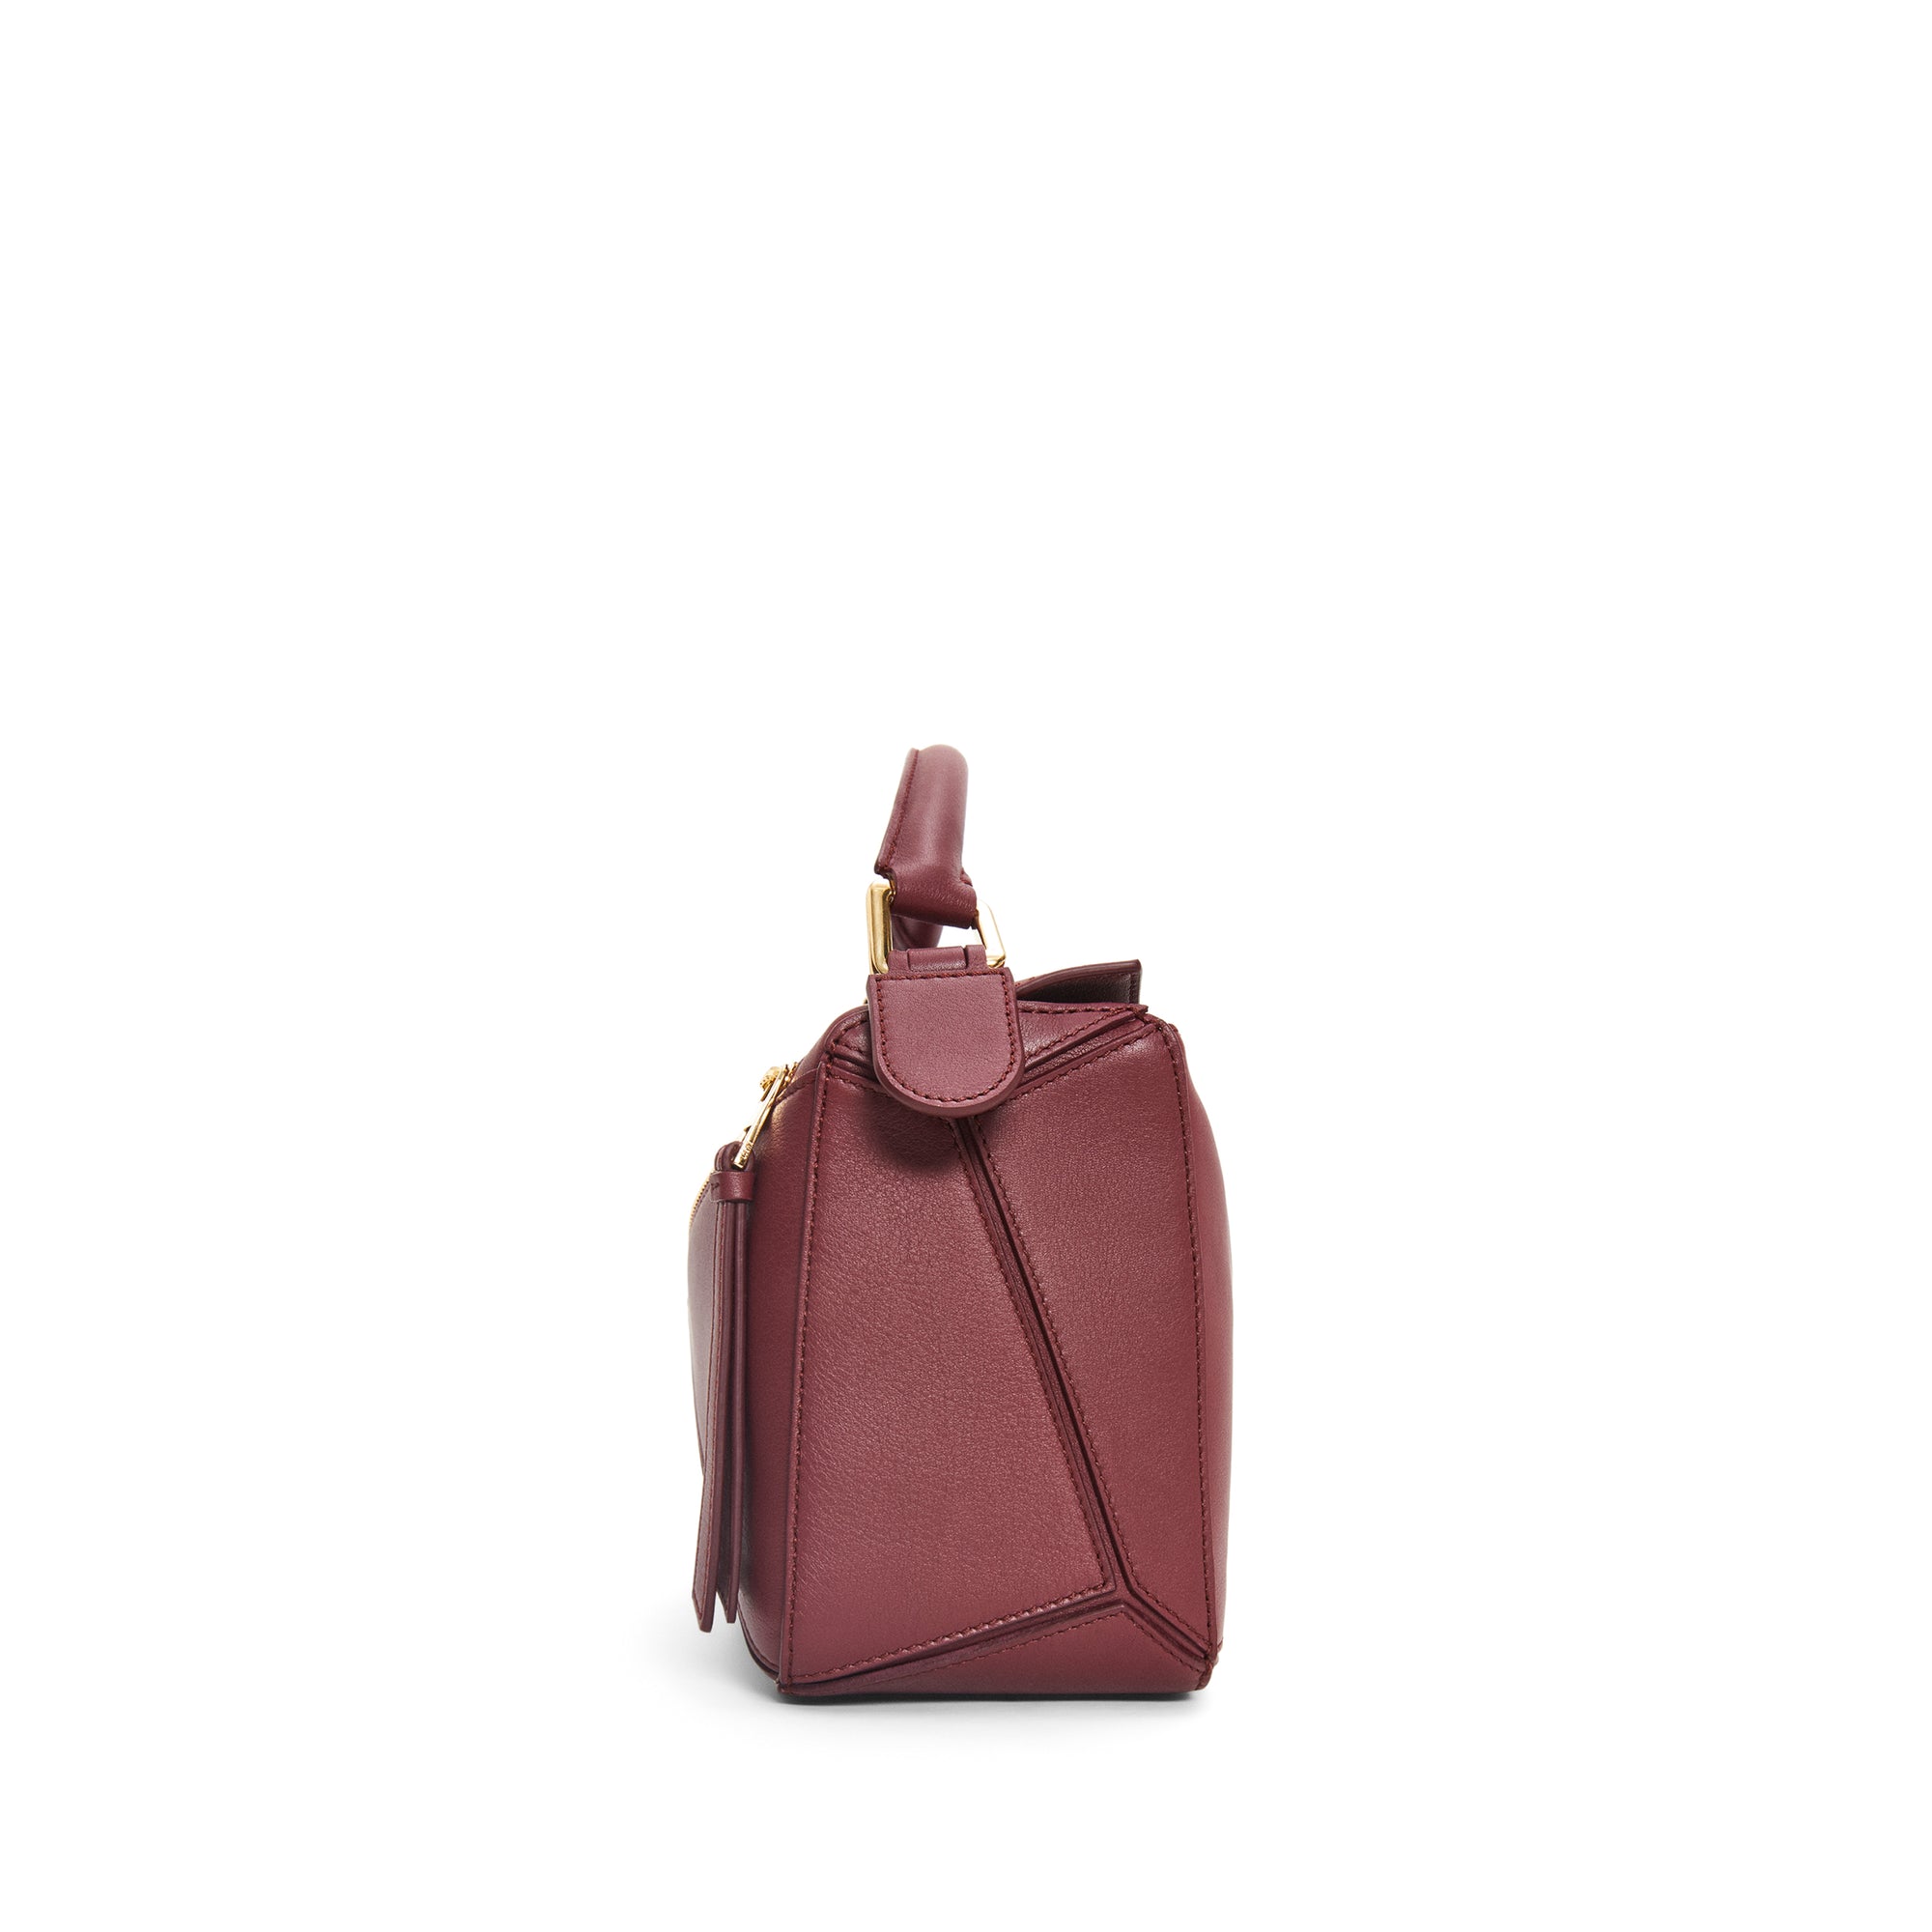 Loewe - Women’s Puzzle Small Bag - (Wild Berry) view 5